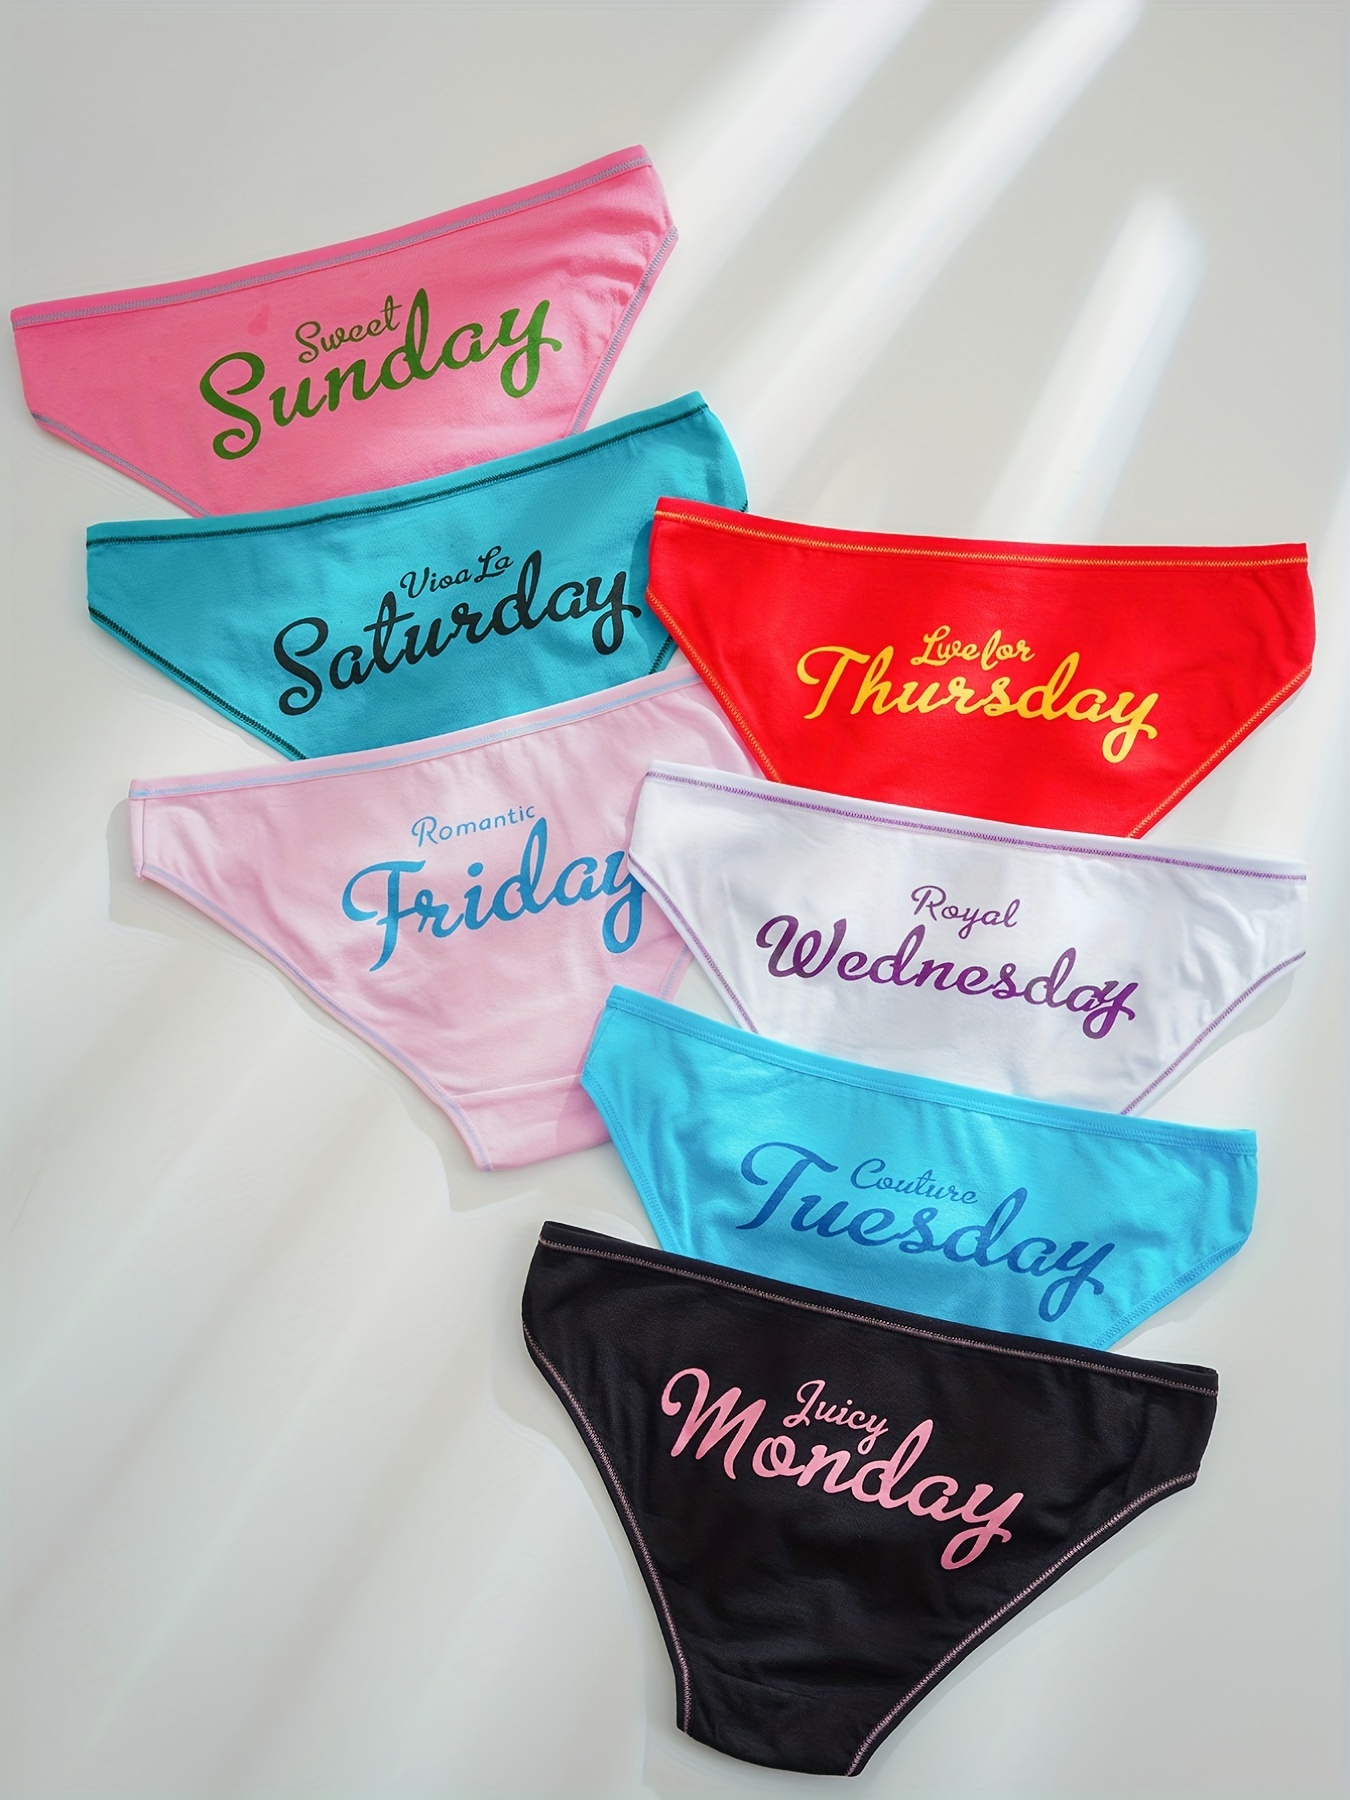 Simple Solid Briefs Comfy Low Waist Everyday Intimates - Temu